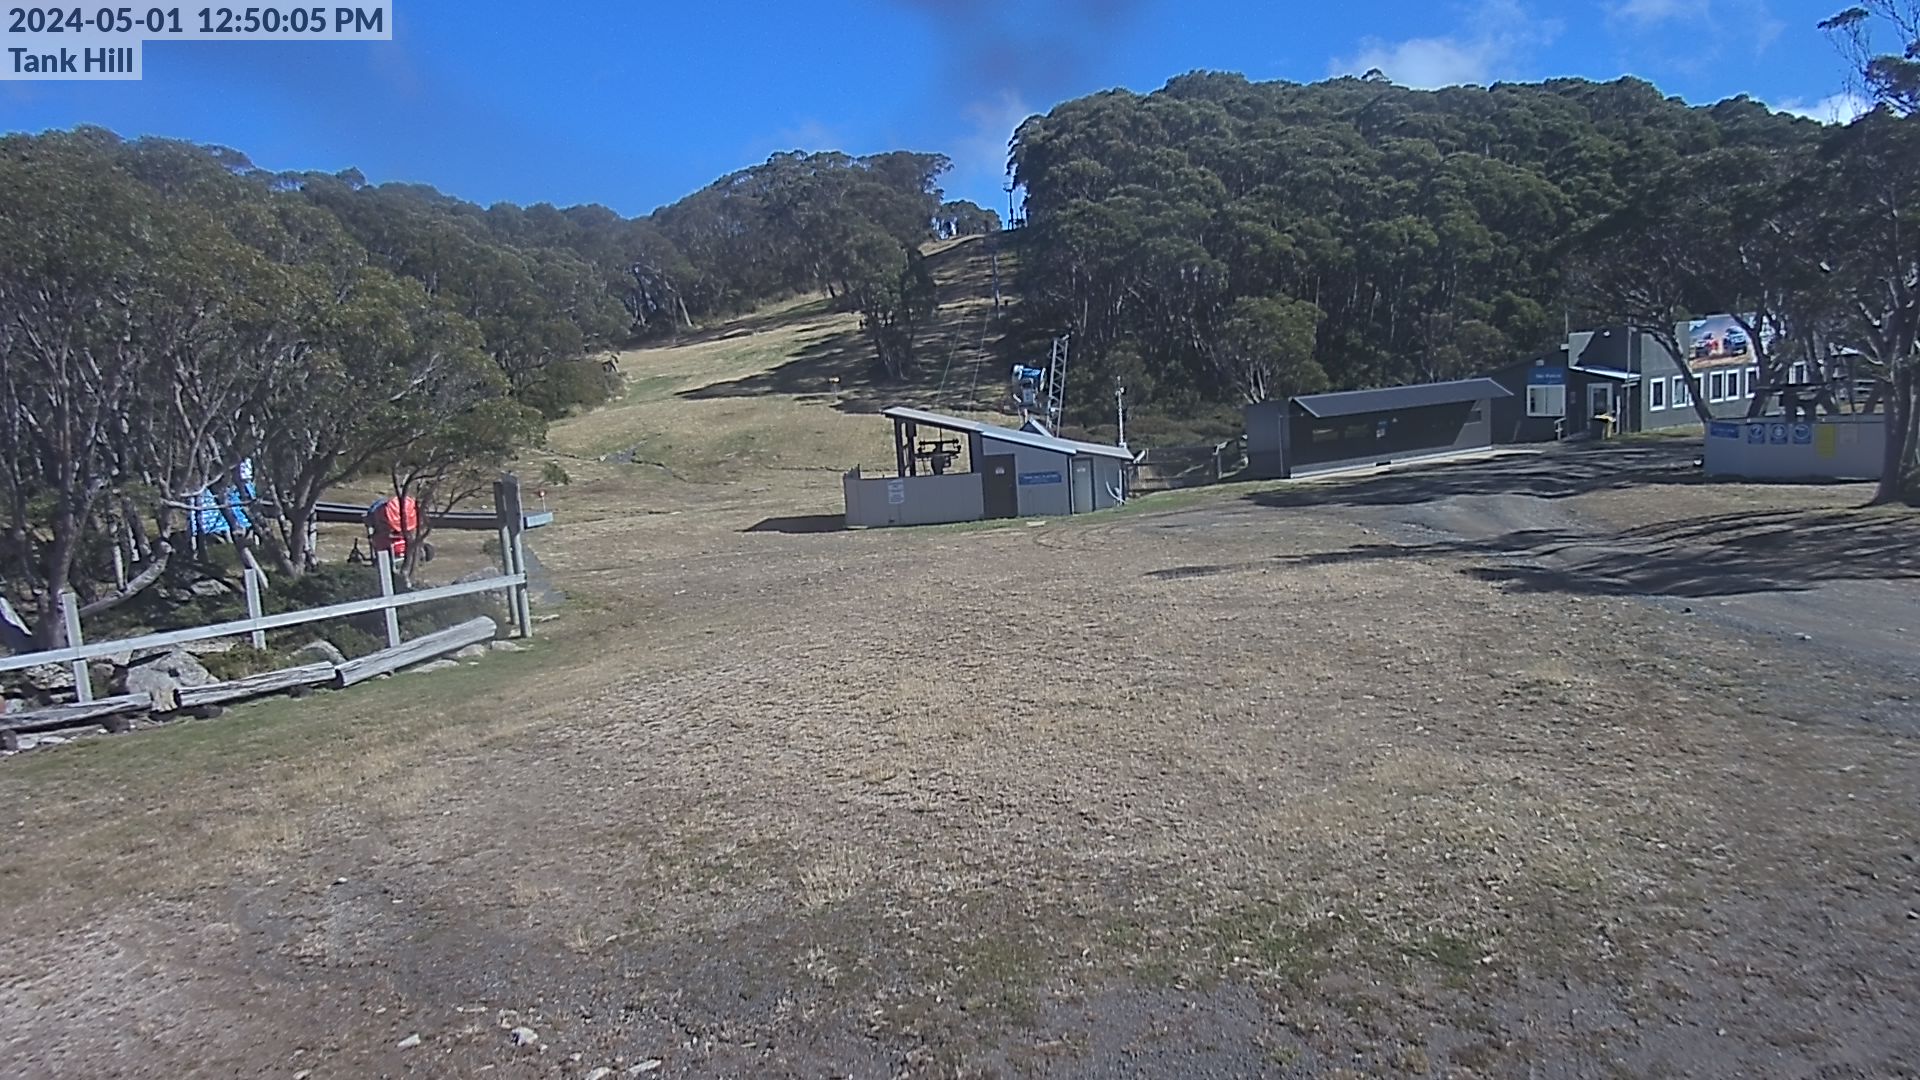 Mt Baw Baw Webcam for Tank Hill